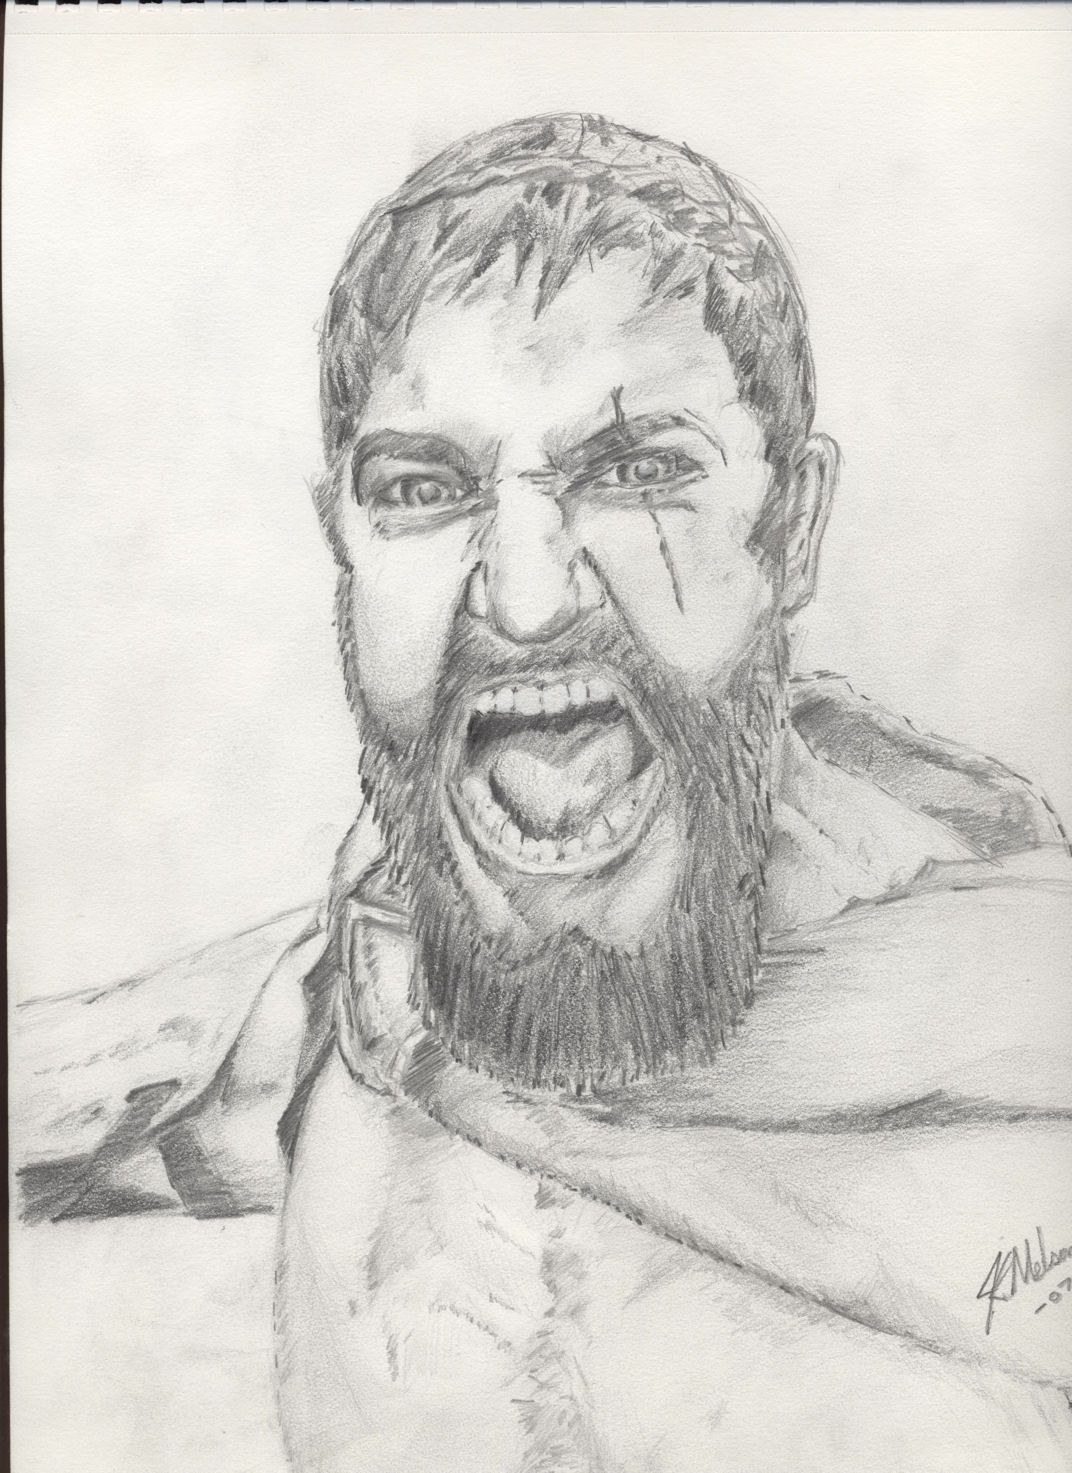 Our King Leonidas! by Amadeuss